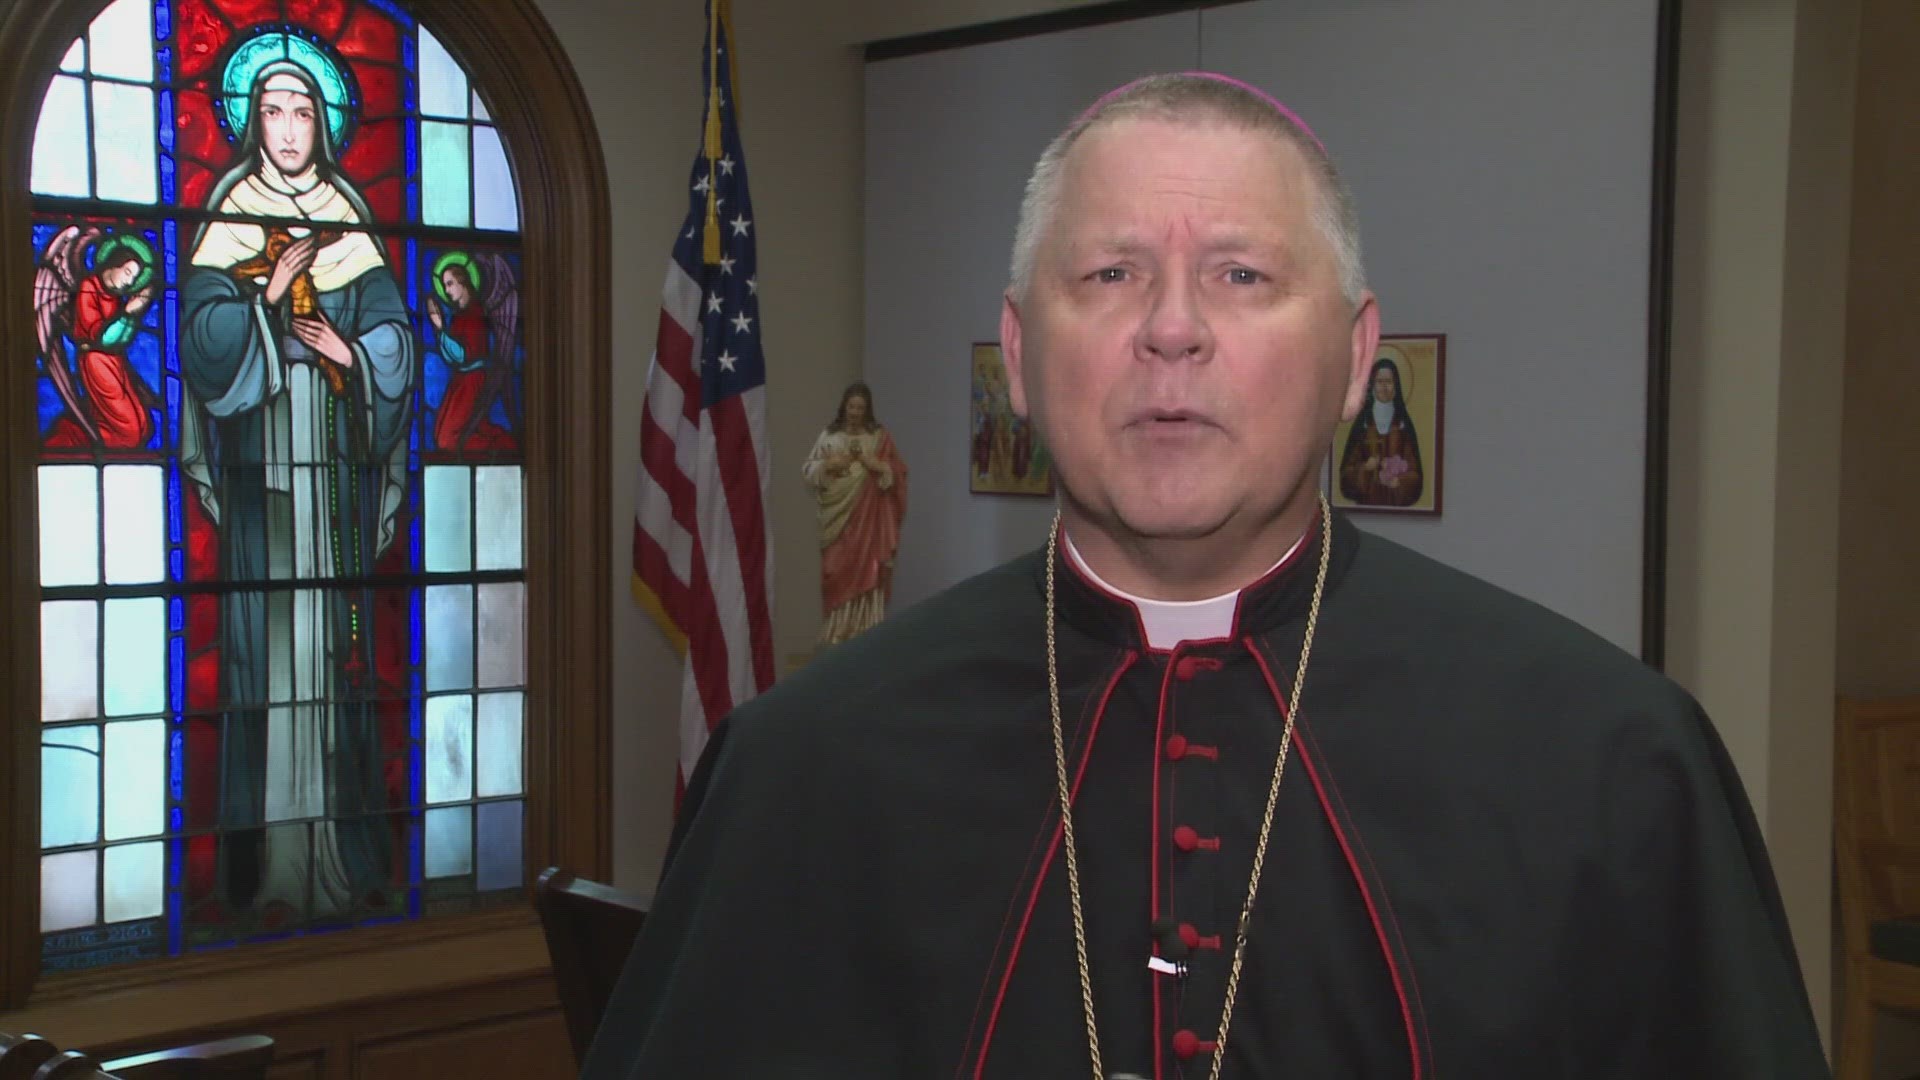 The Vatican said Tuesday it appointed Shelton Fabre, Archbishop of Louisville, to serve as the Apostolic Administrator of the diocese in the interim.